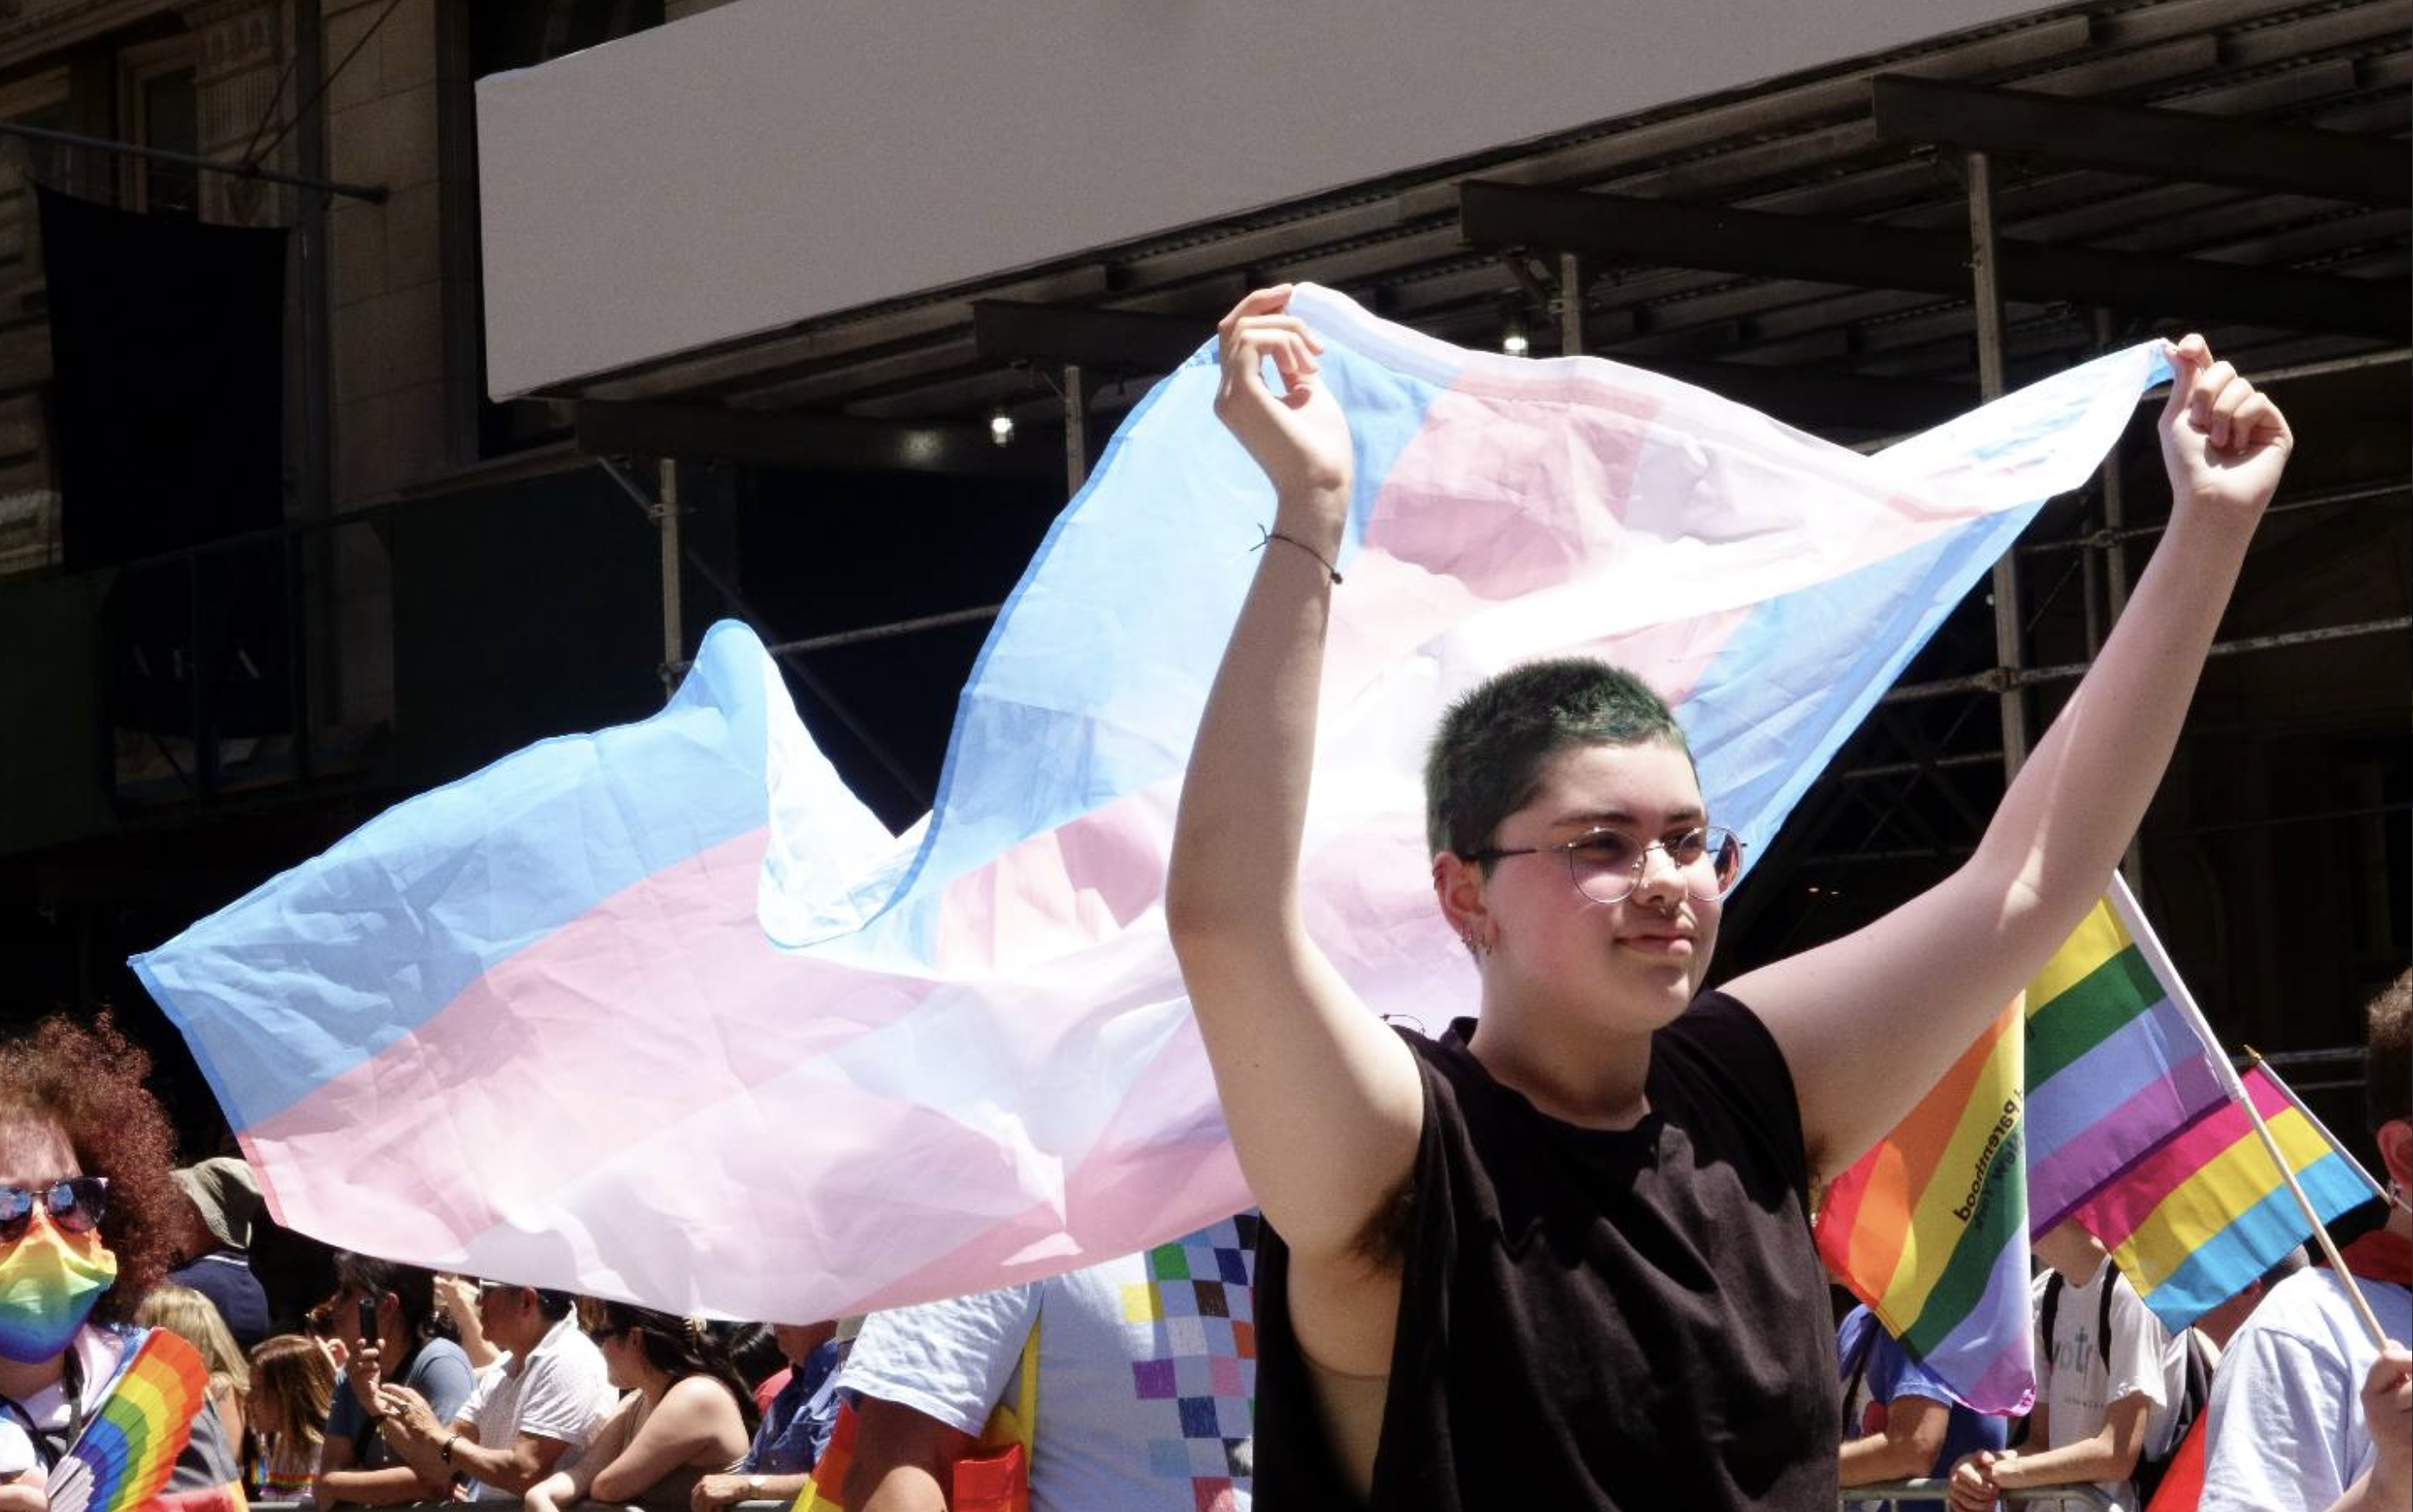 Being Openly Trans in High School Is Already Hard. Republicans Want to Make It Impossible.